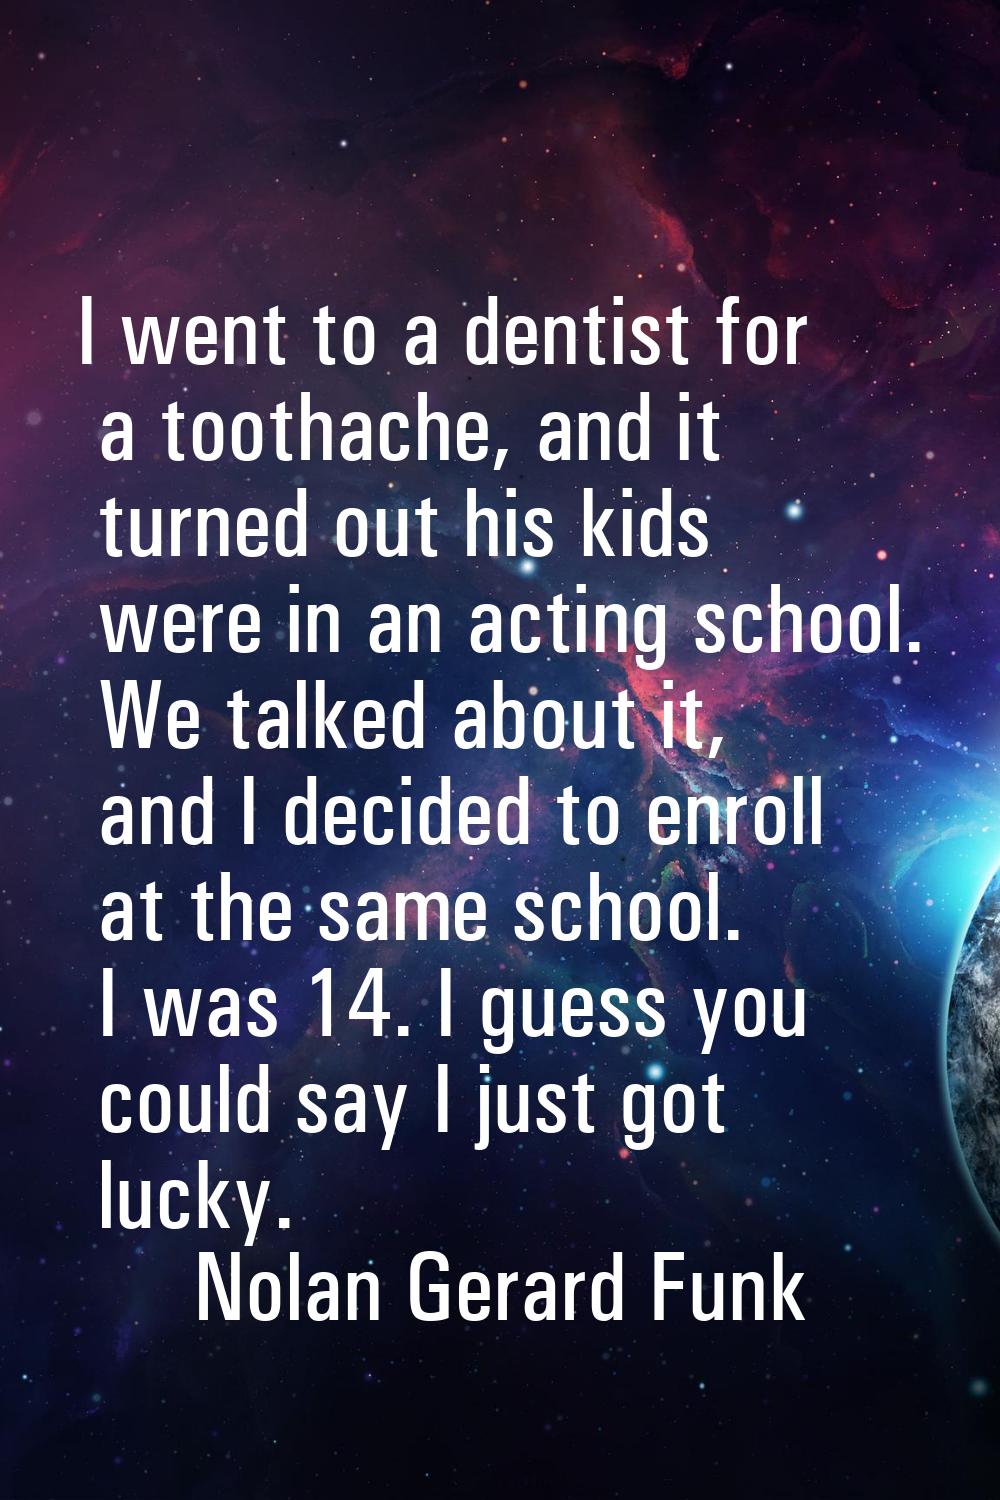 I went to a dentist for a toothache, and it turned out his kids were in an acting school. We talked